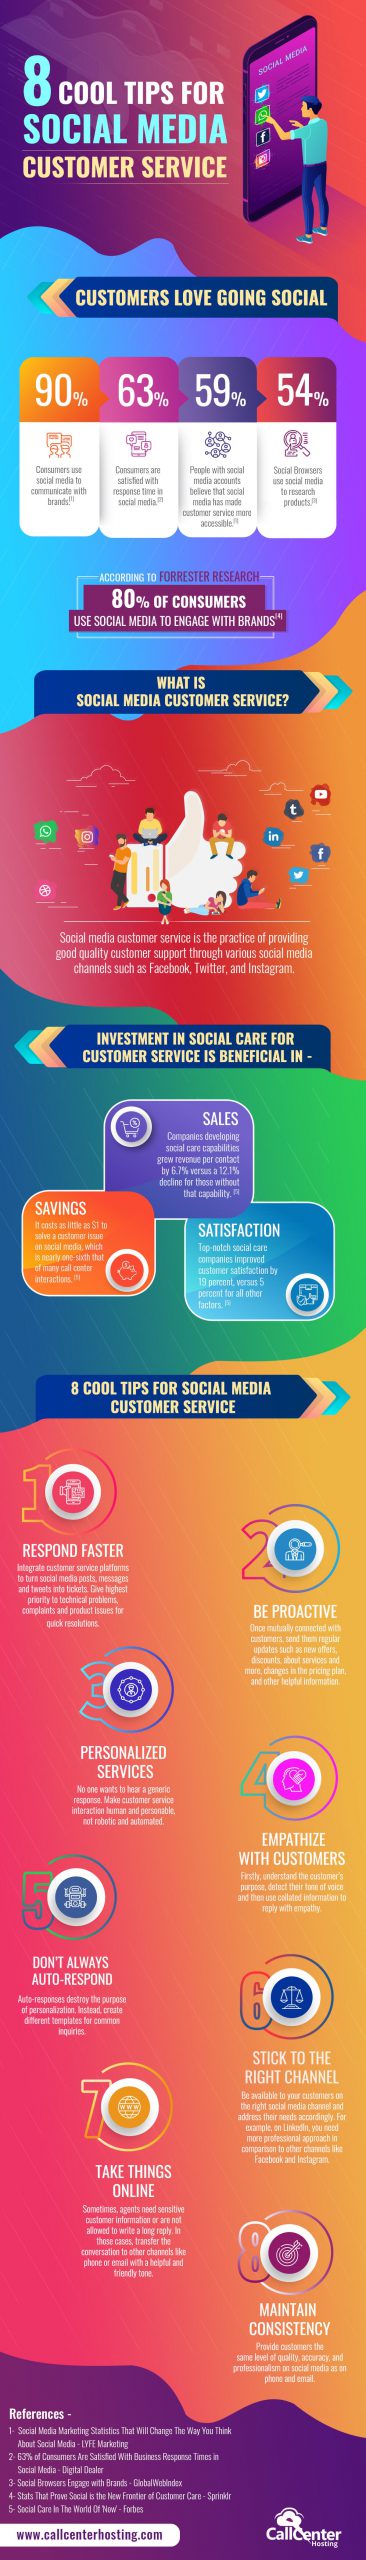 8 tips for social media customer service infographic scaled 1